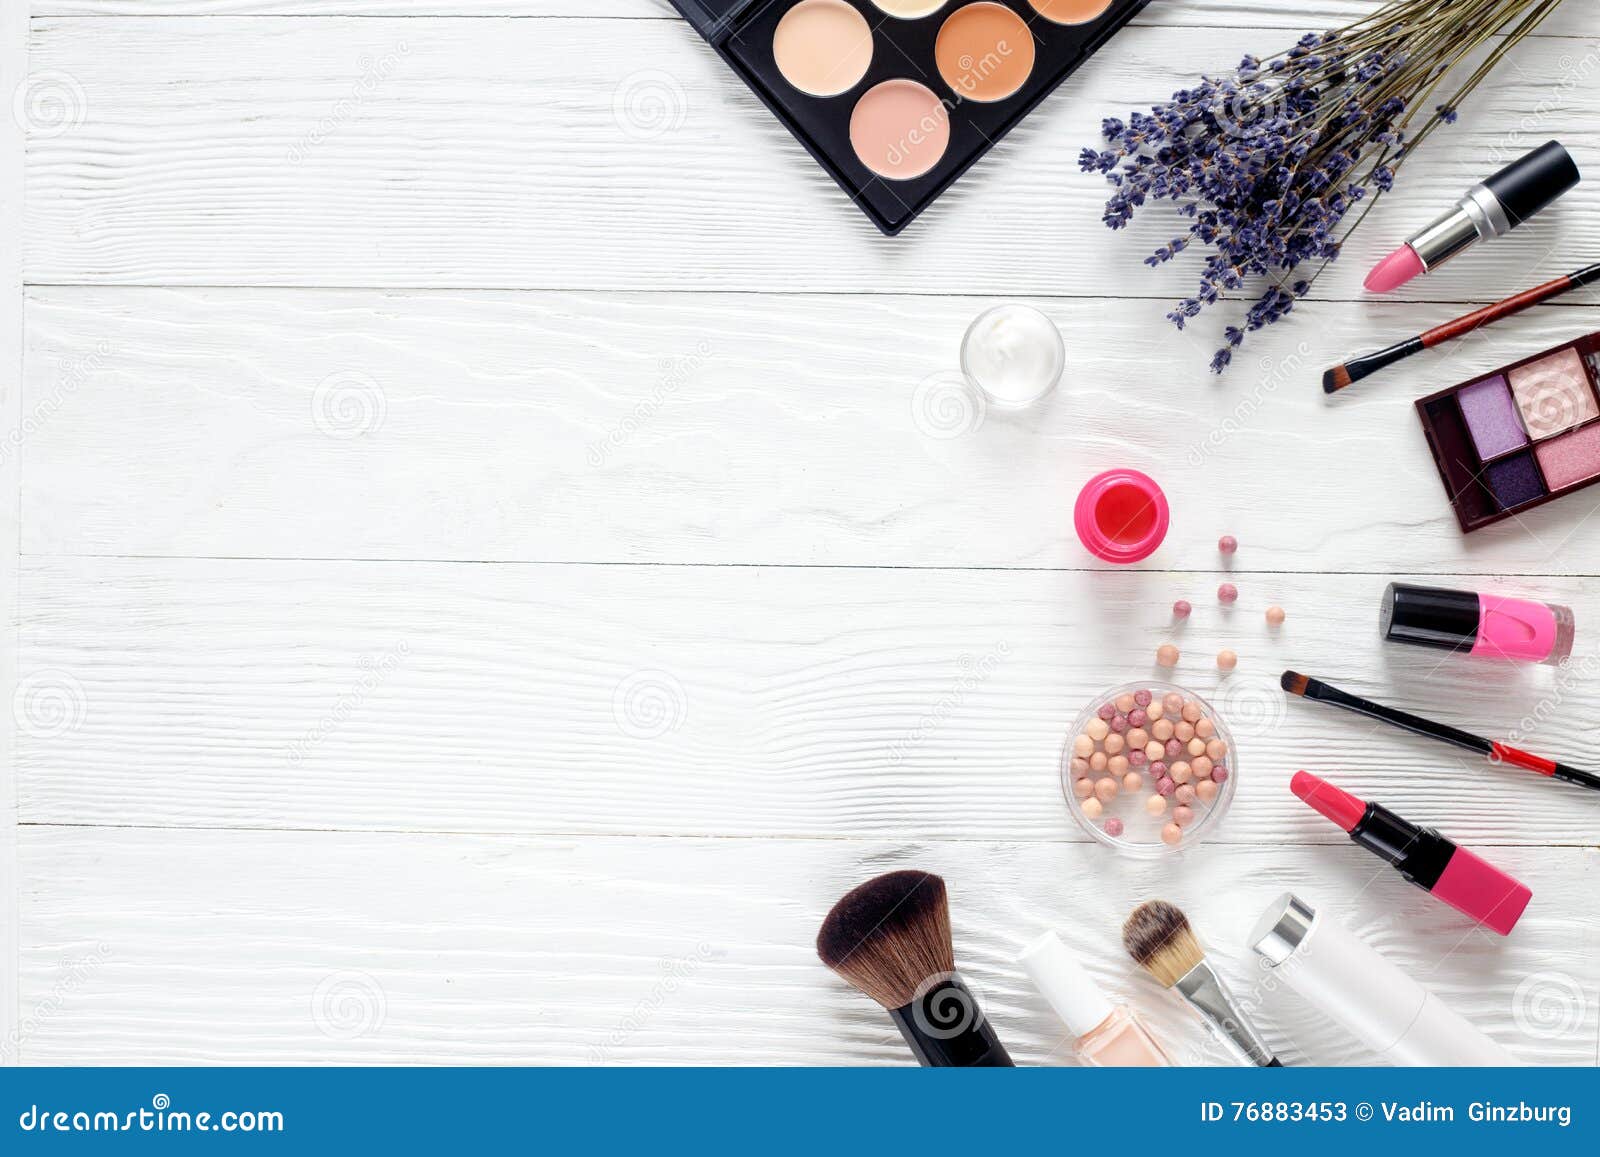 Makeup Set on Wooden Table with Lavender Top View Stock Image - Image ...